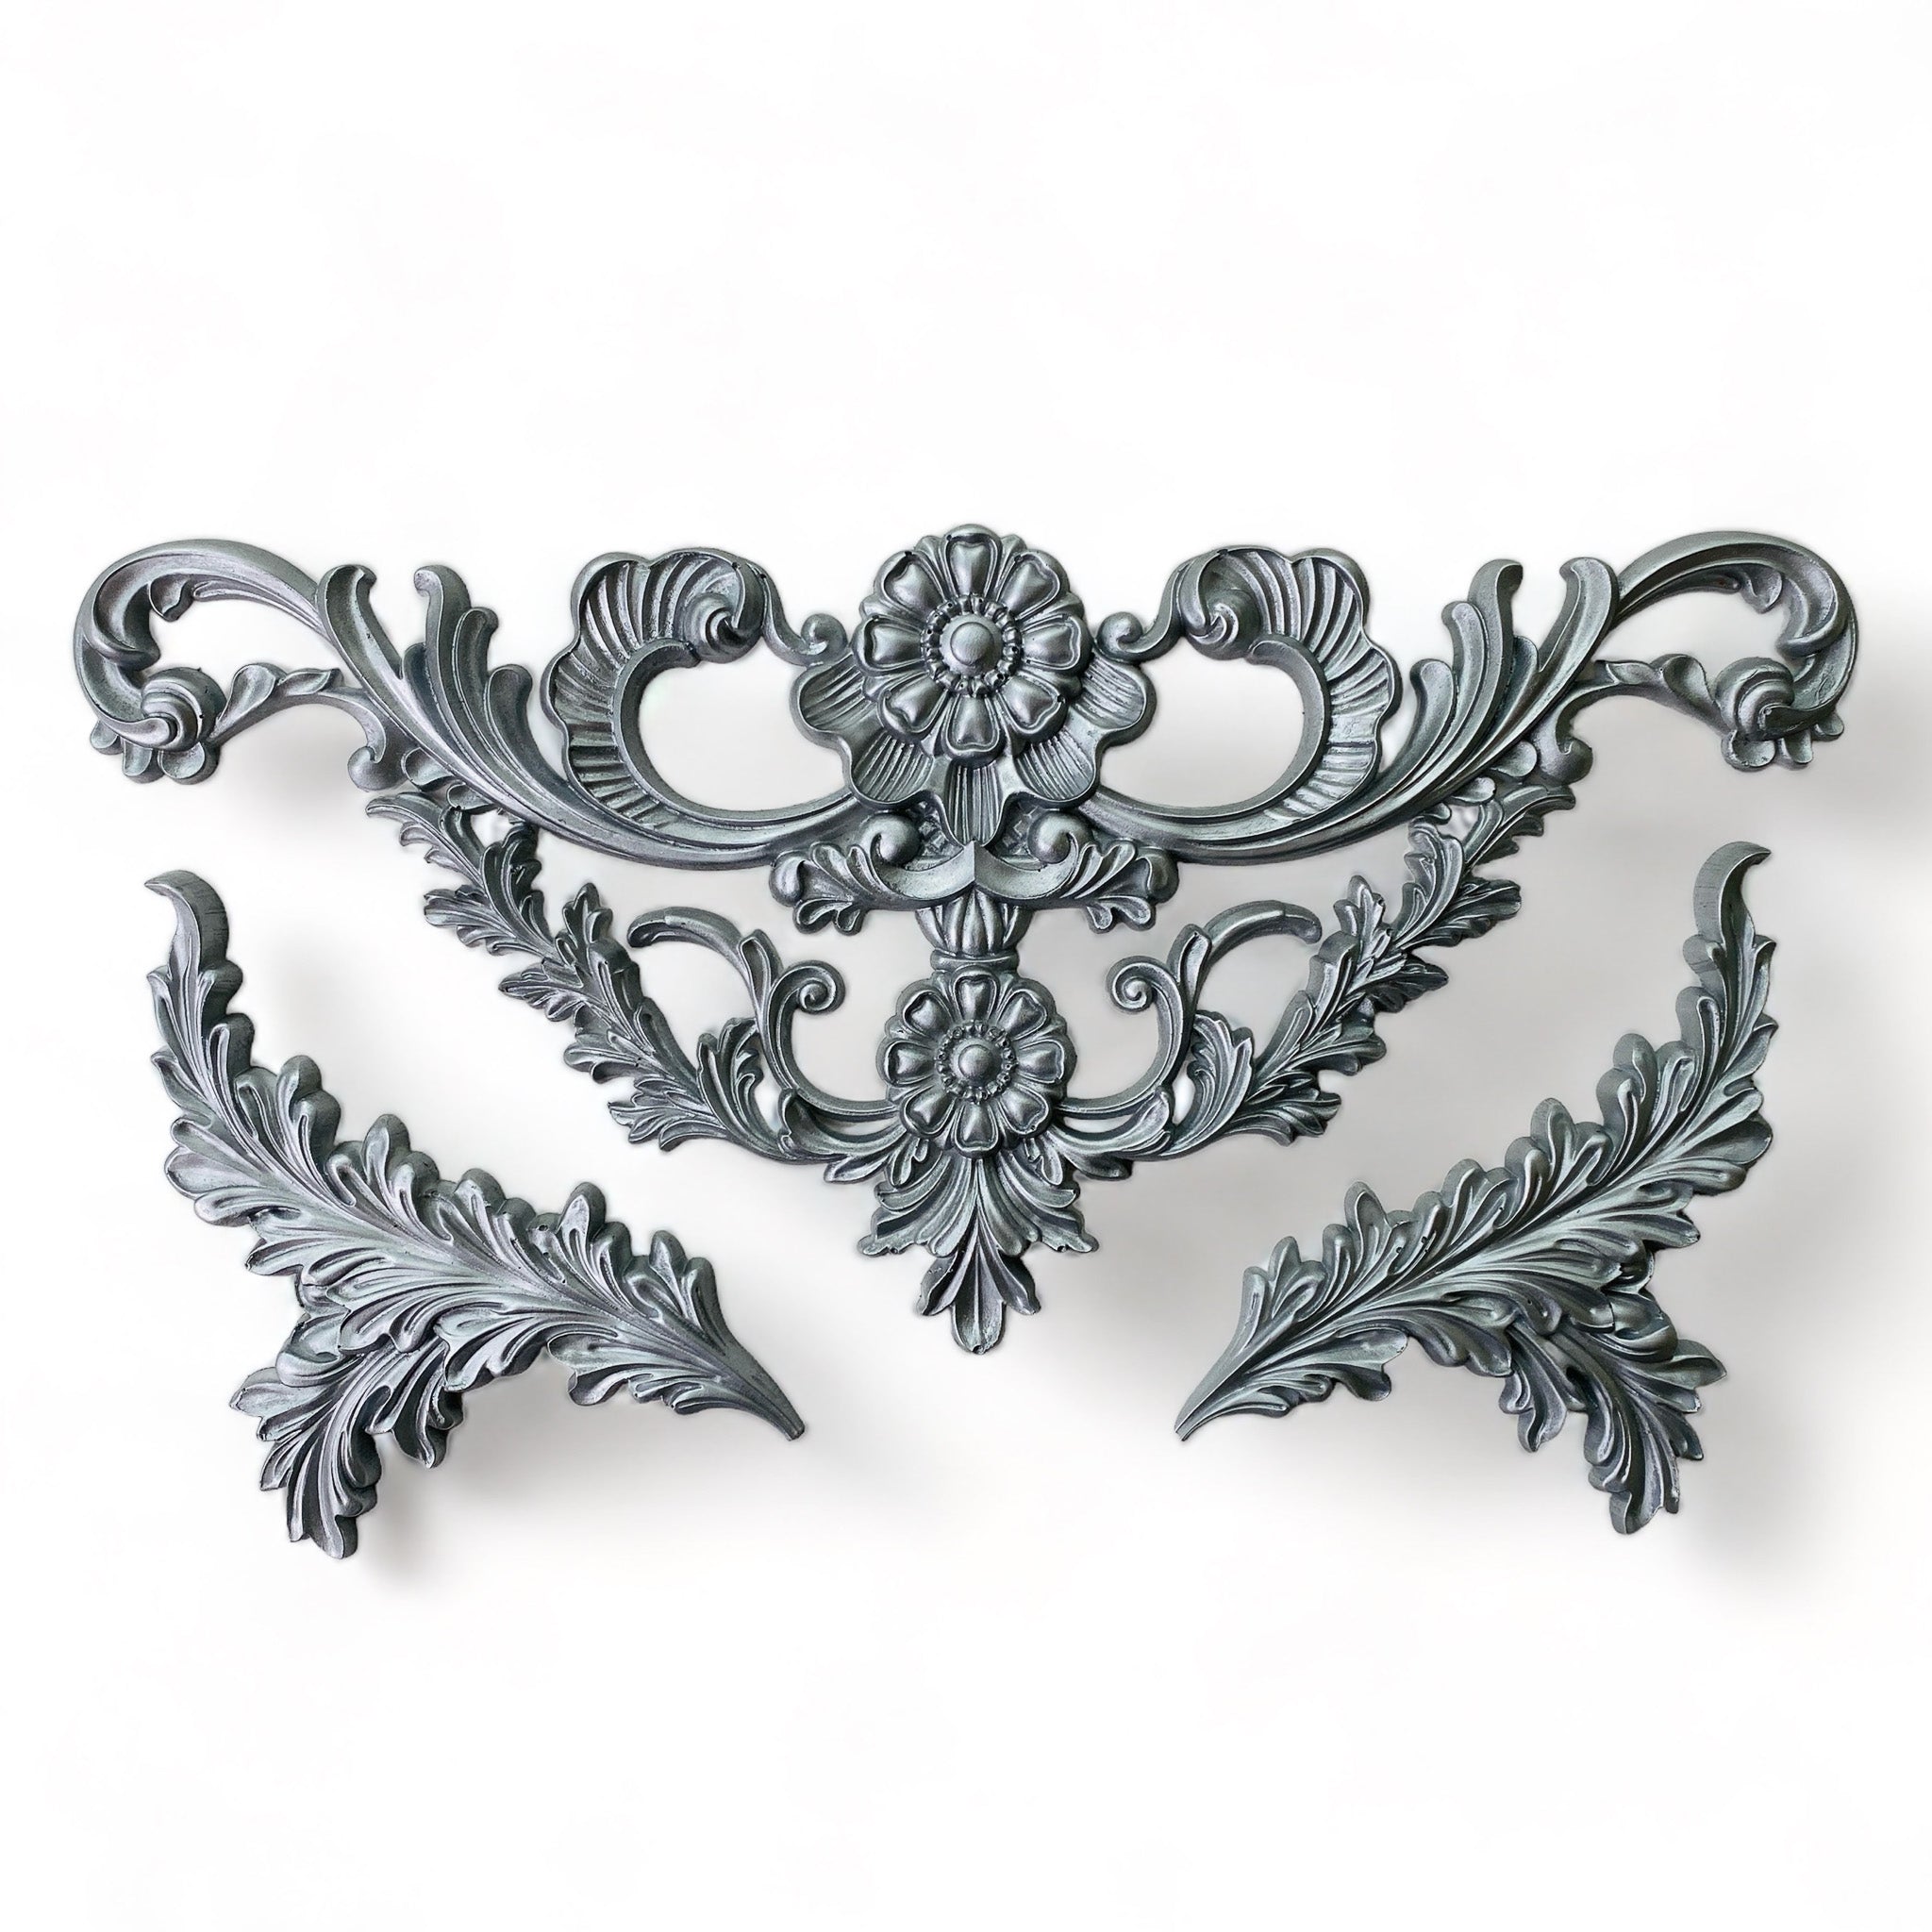 Silver-colored silicone mold castings of a large ornate scroll floral leaf accent piece and 2 leaf plumes are against a white background.